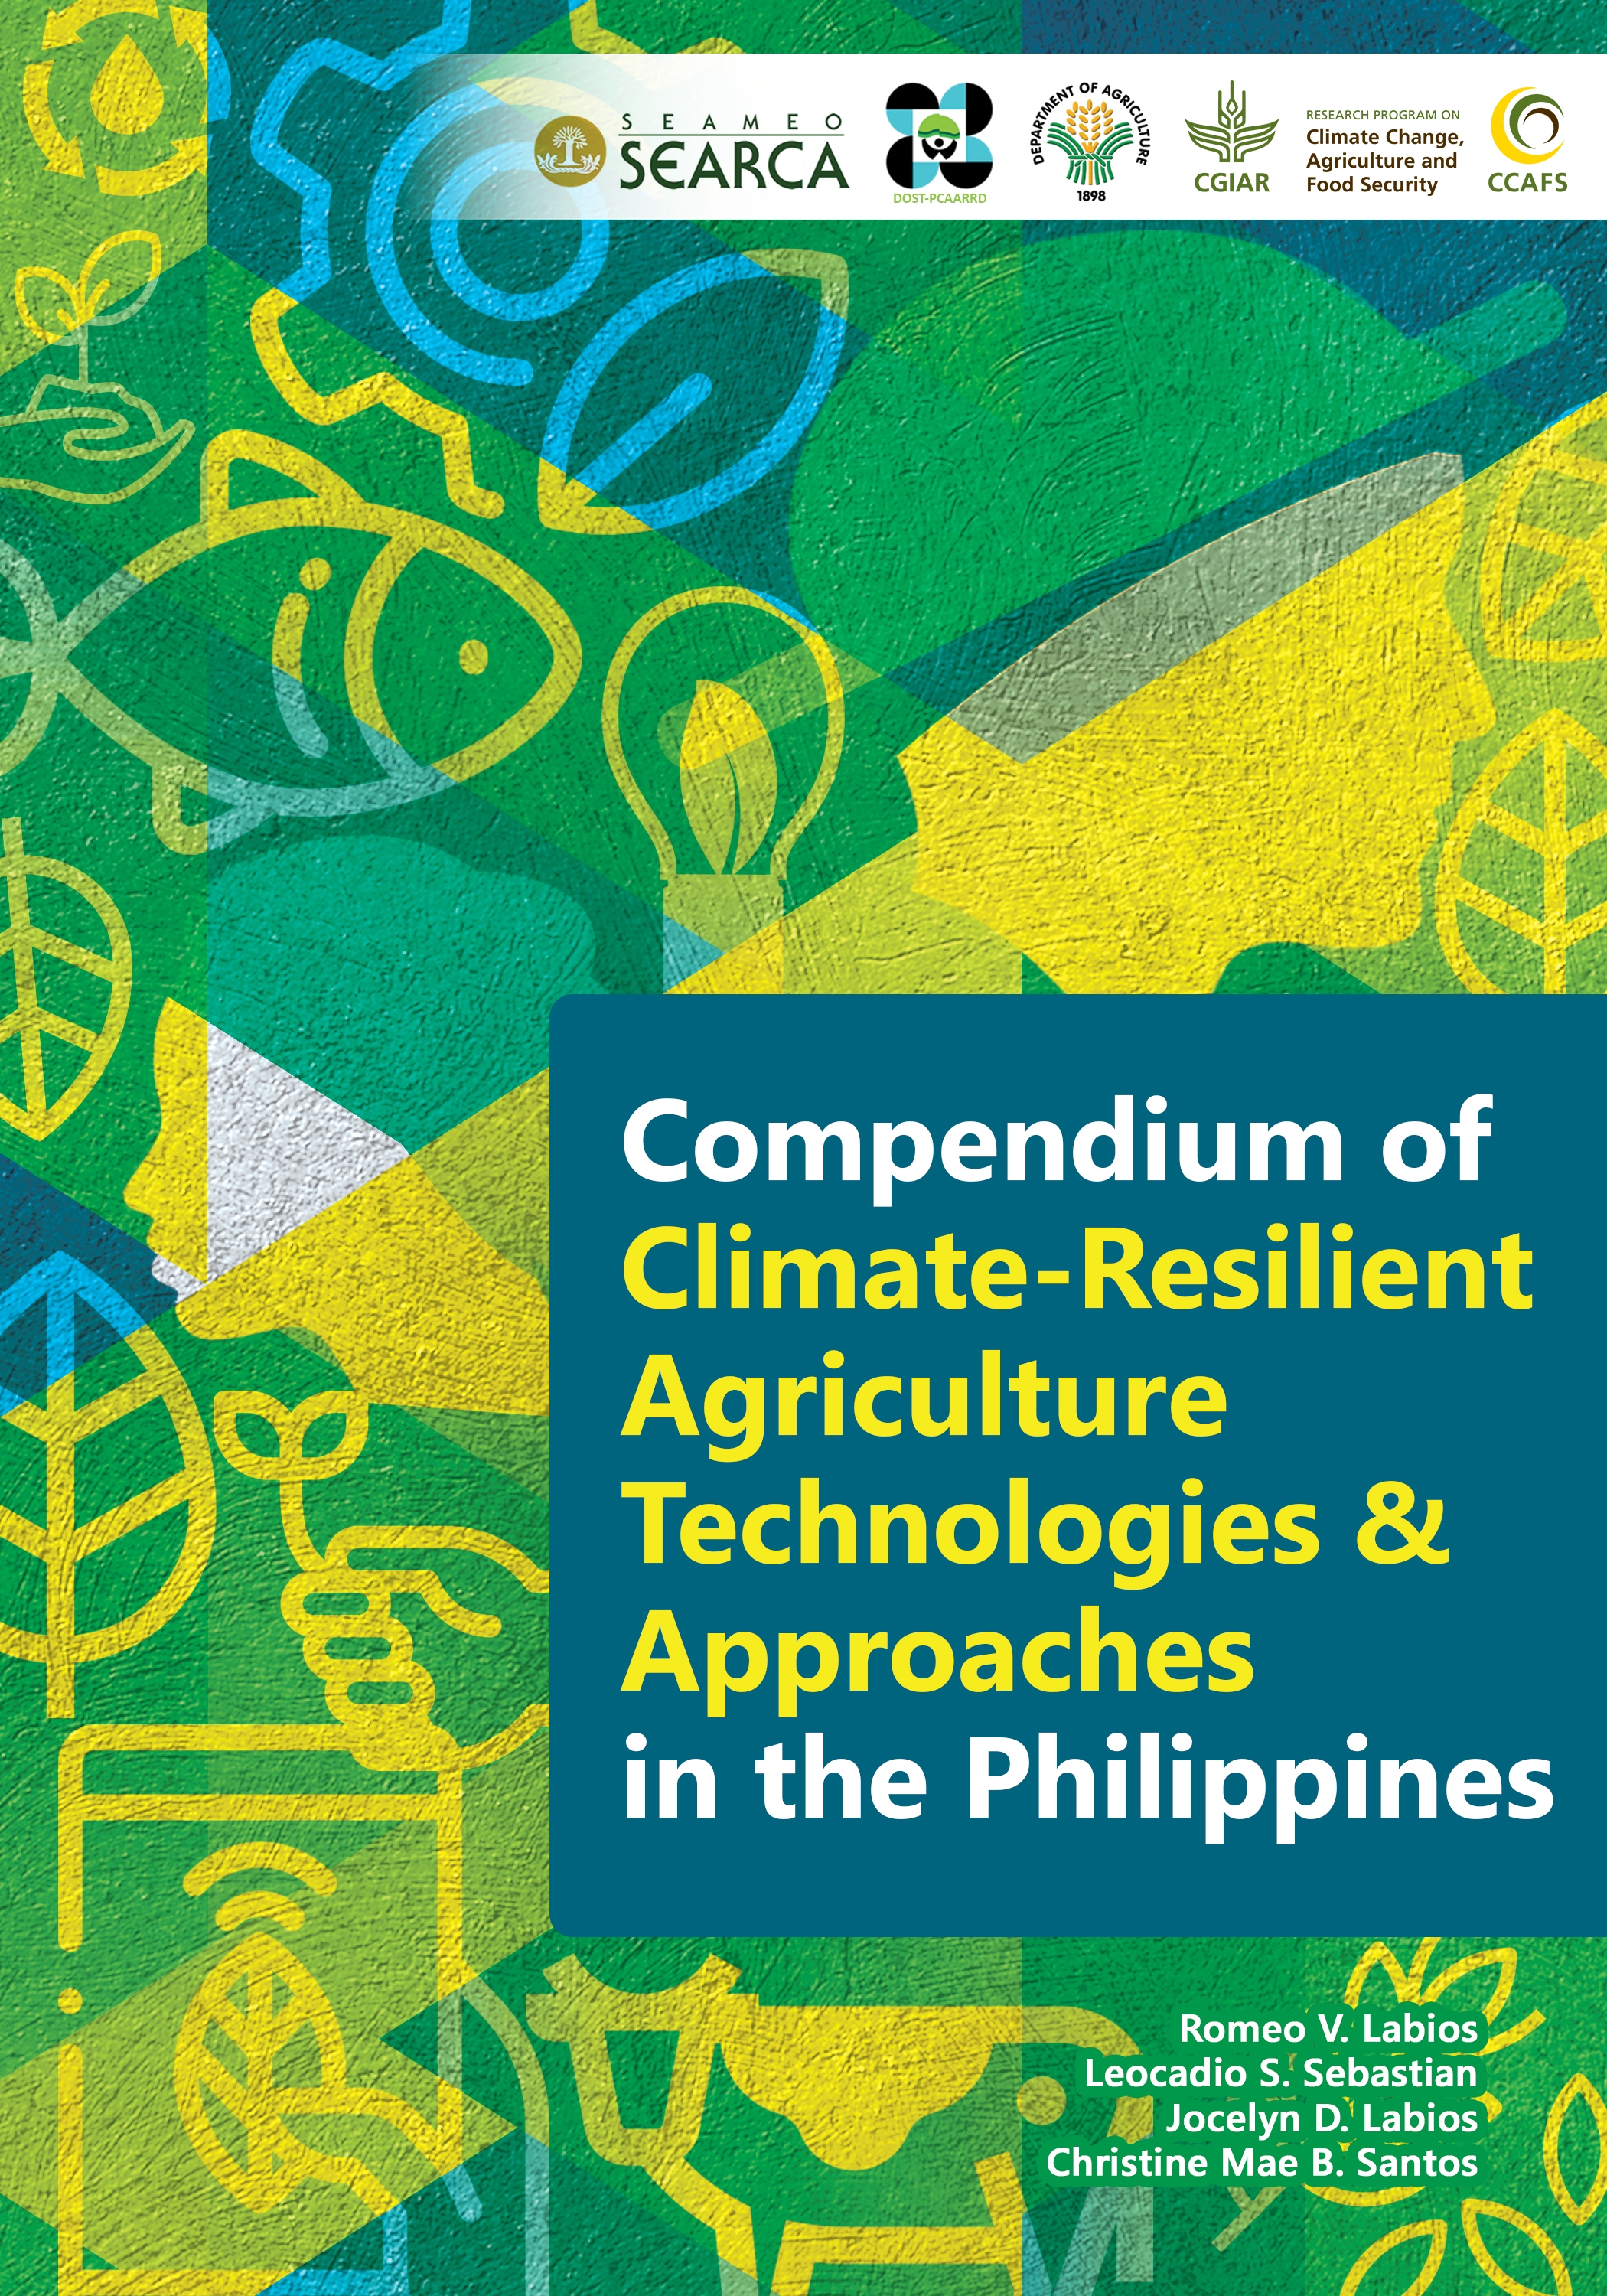 Compendium of Climate-Resilient Agriculture Technologies and Approaches in the Philippines